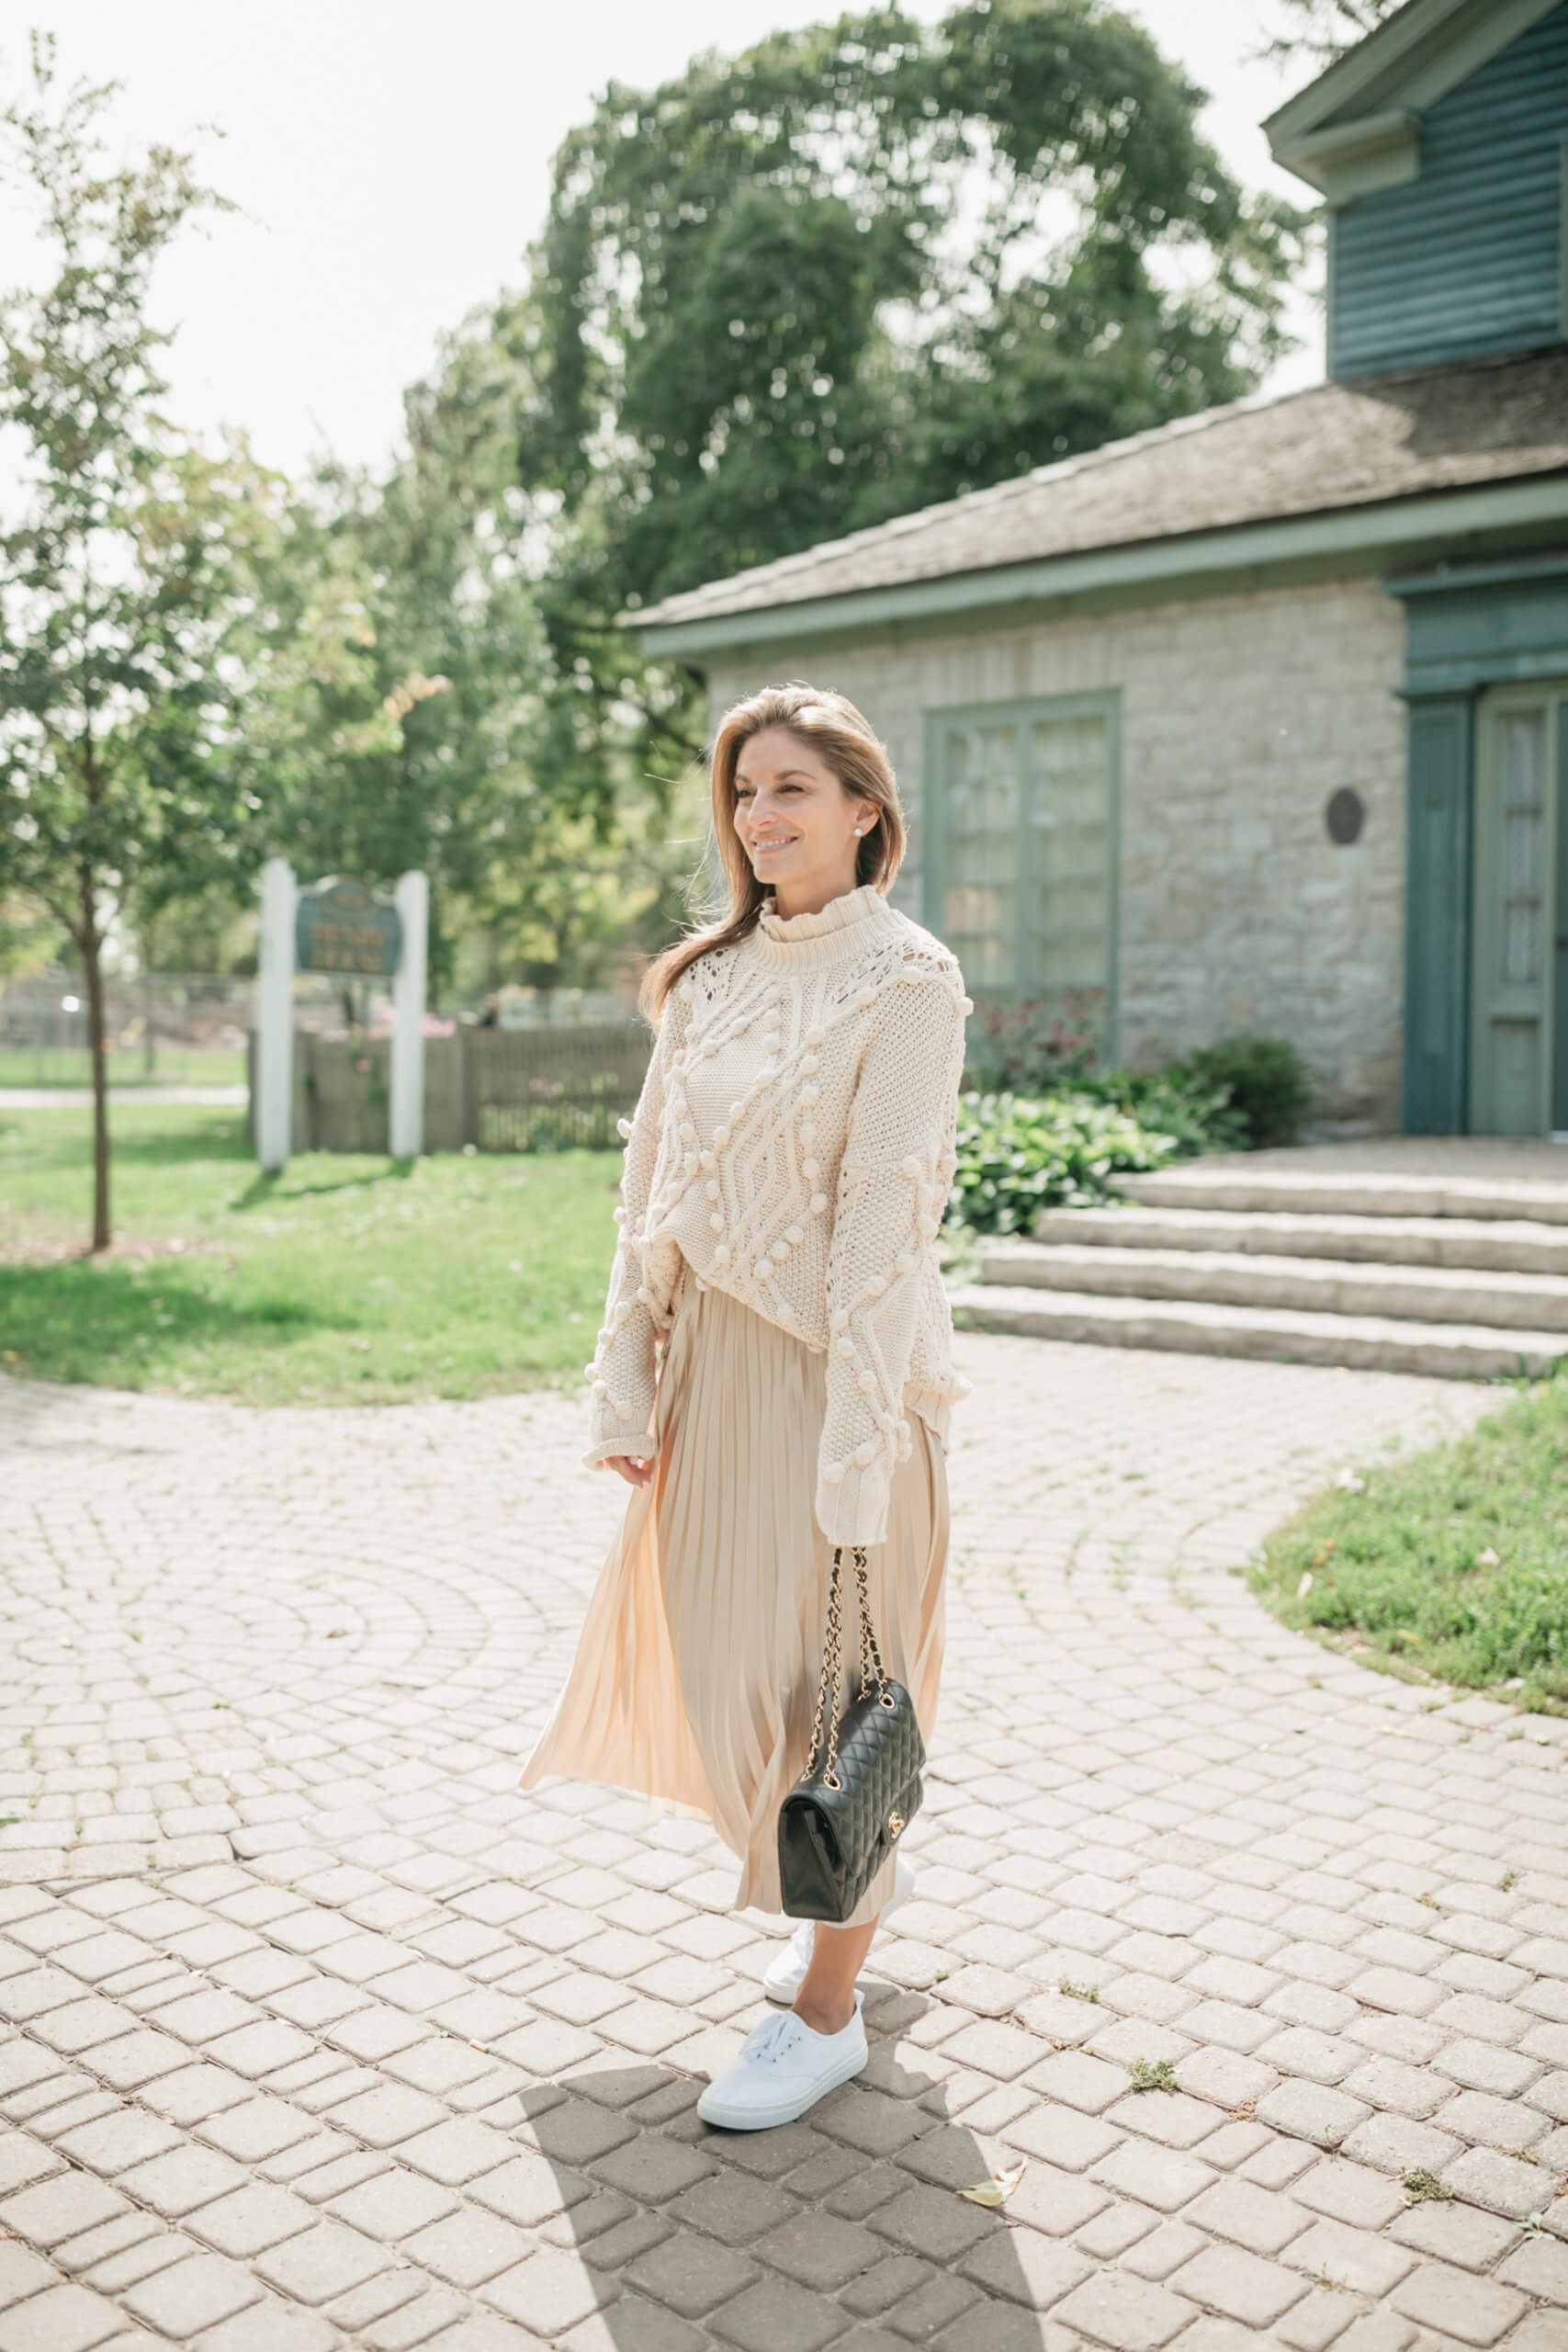 Chicwish HOLLOW OUT POM-POM CABLE KNIT SWEATER IN CREAM; chicwish FULL PLEATED MIDI SKIRT IN CHAMPAGNE; Fall look with maxi skirt; chanel flap bag; sparkleshinylove  